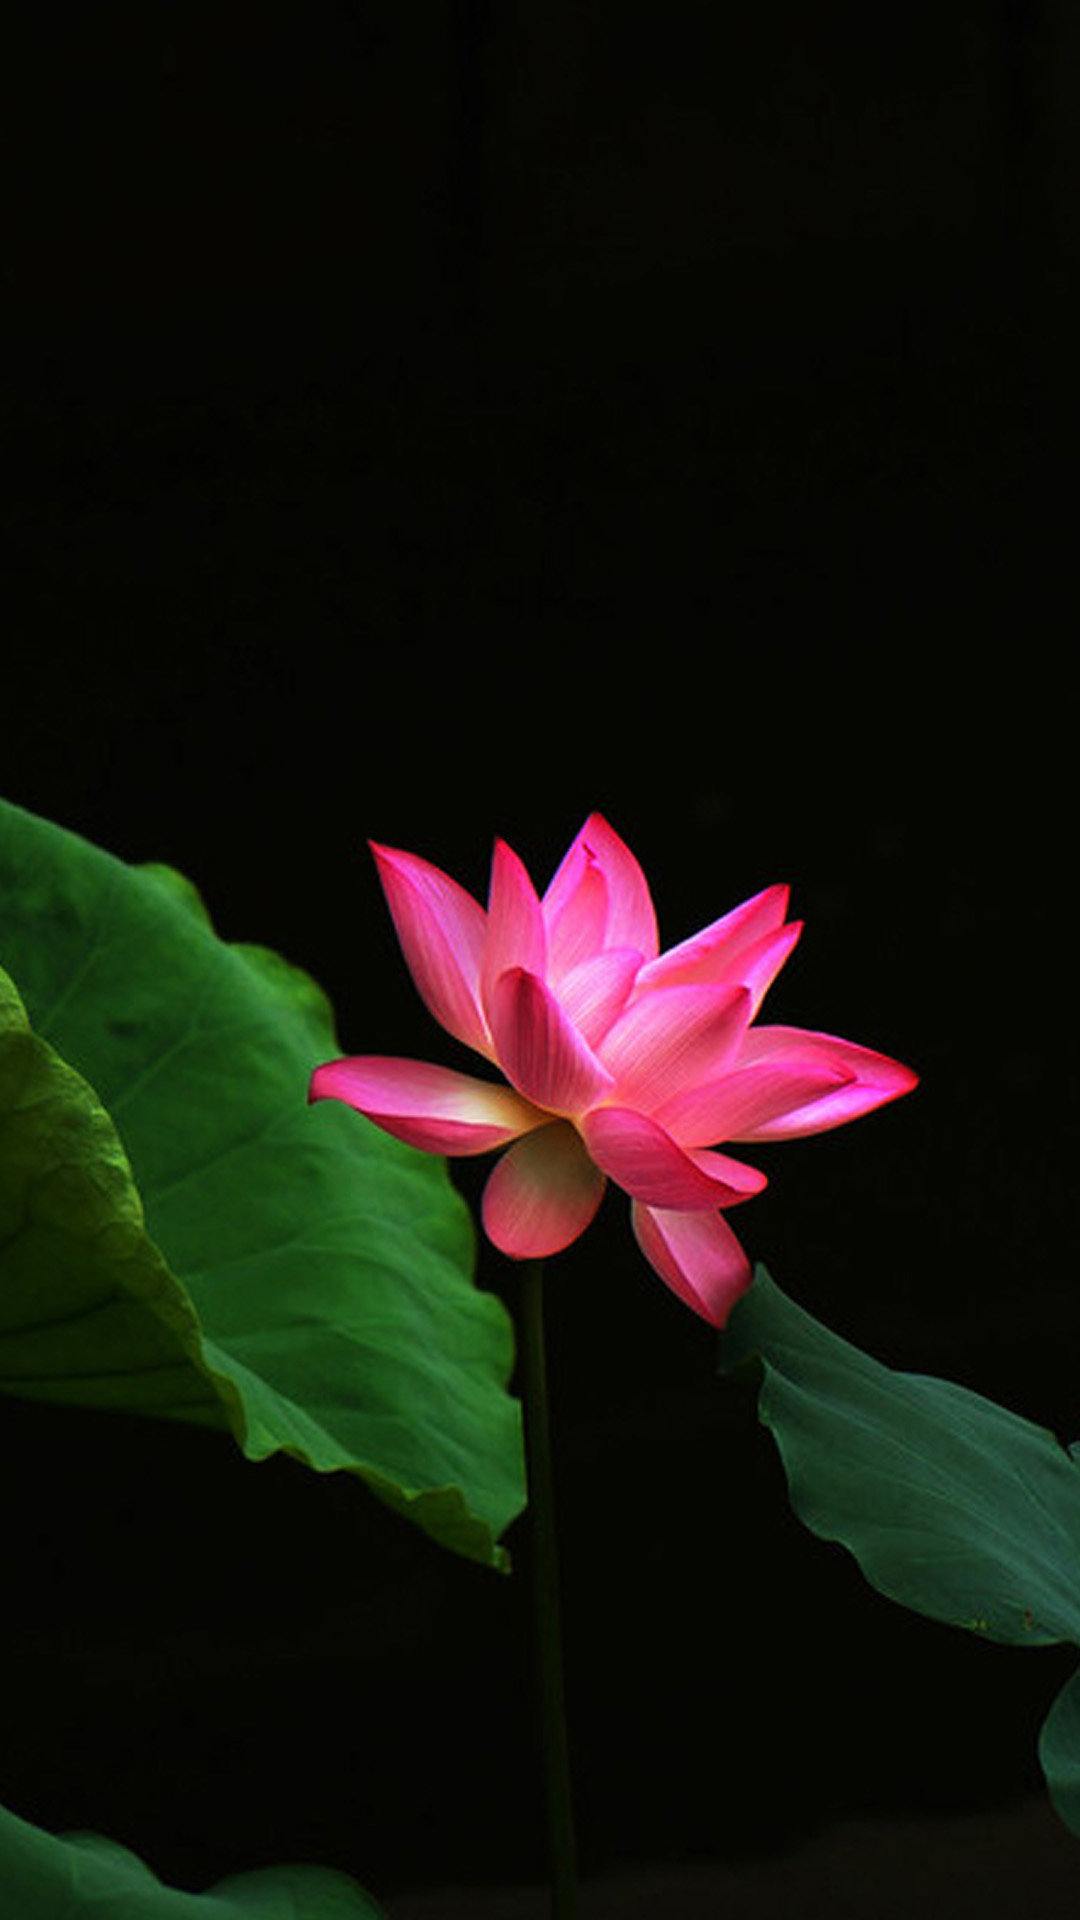 Home Plant Flower Red Lotus Galaxy Note Wallpaper